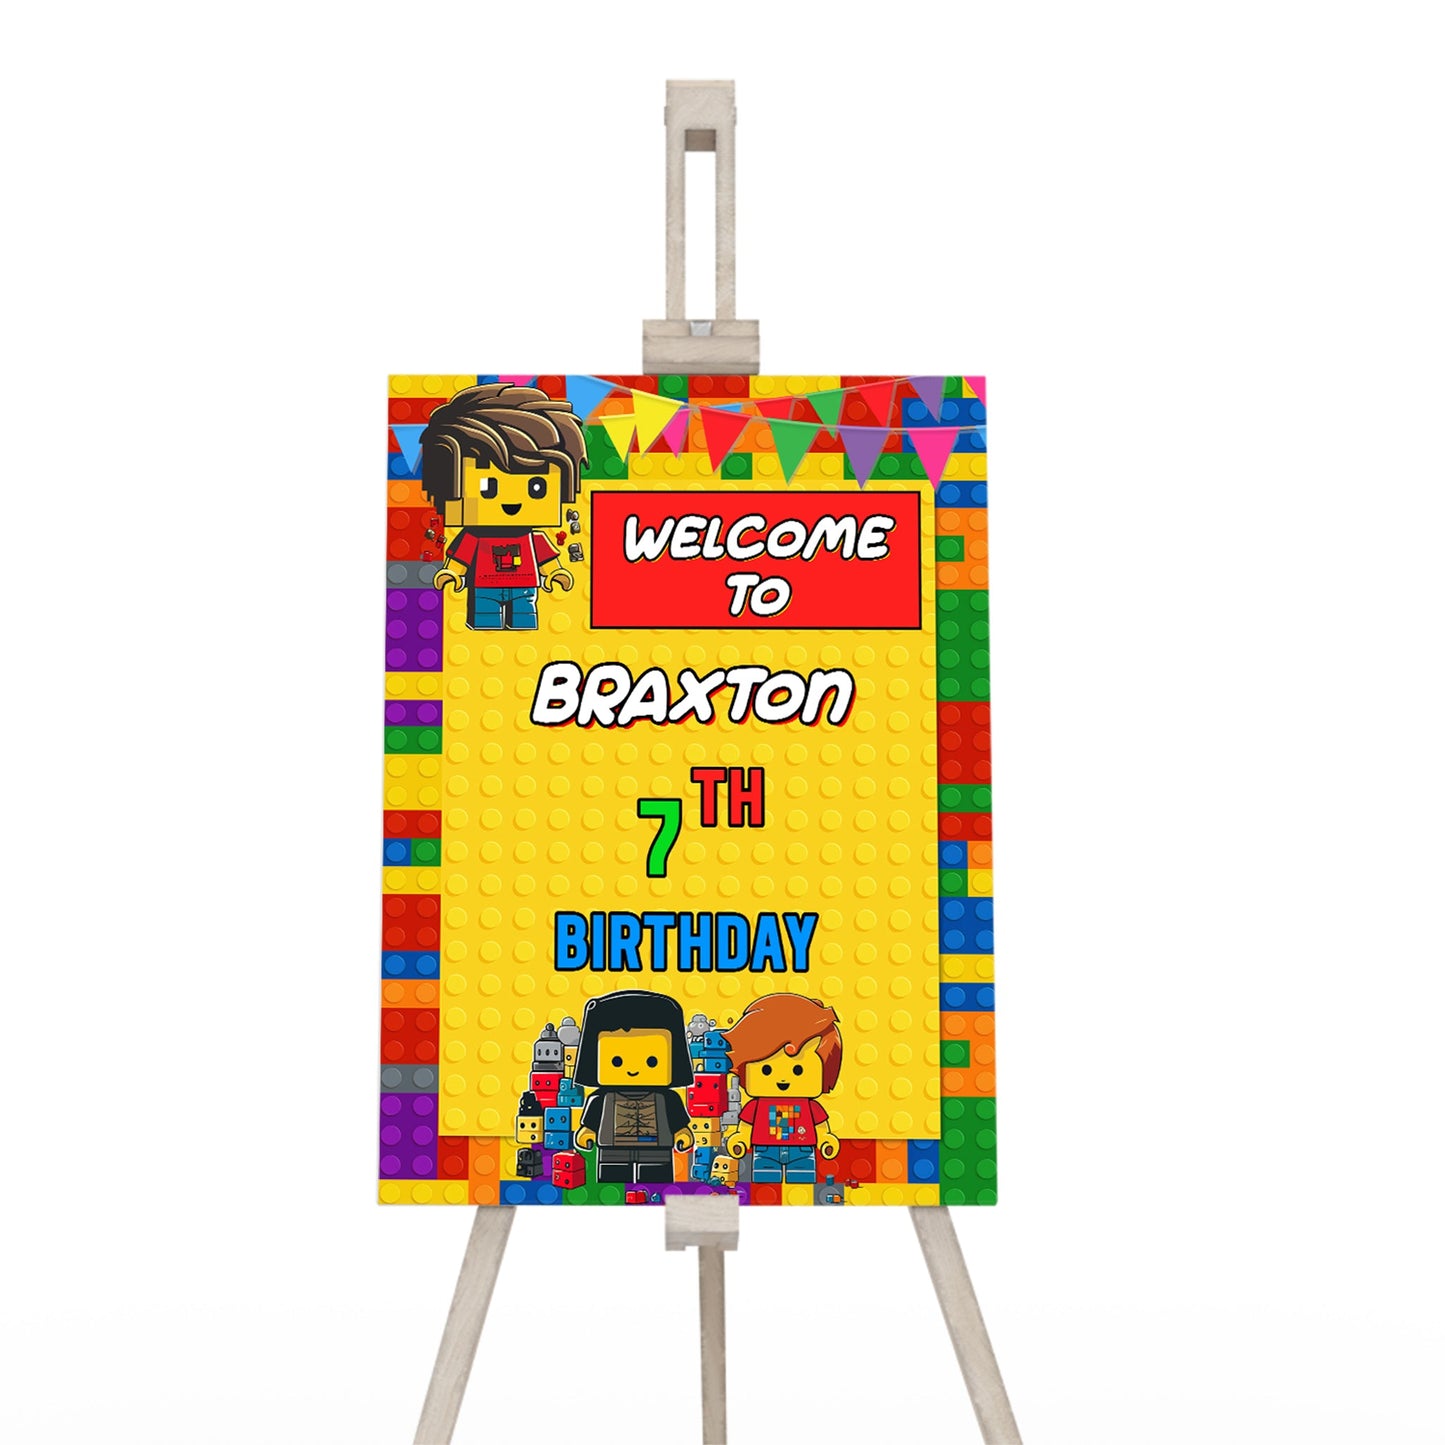 Welcome sign with a Lego theme